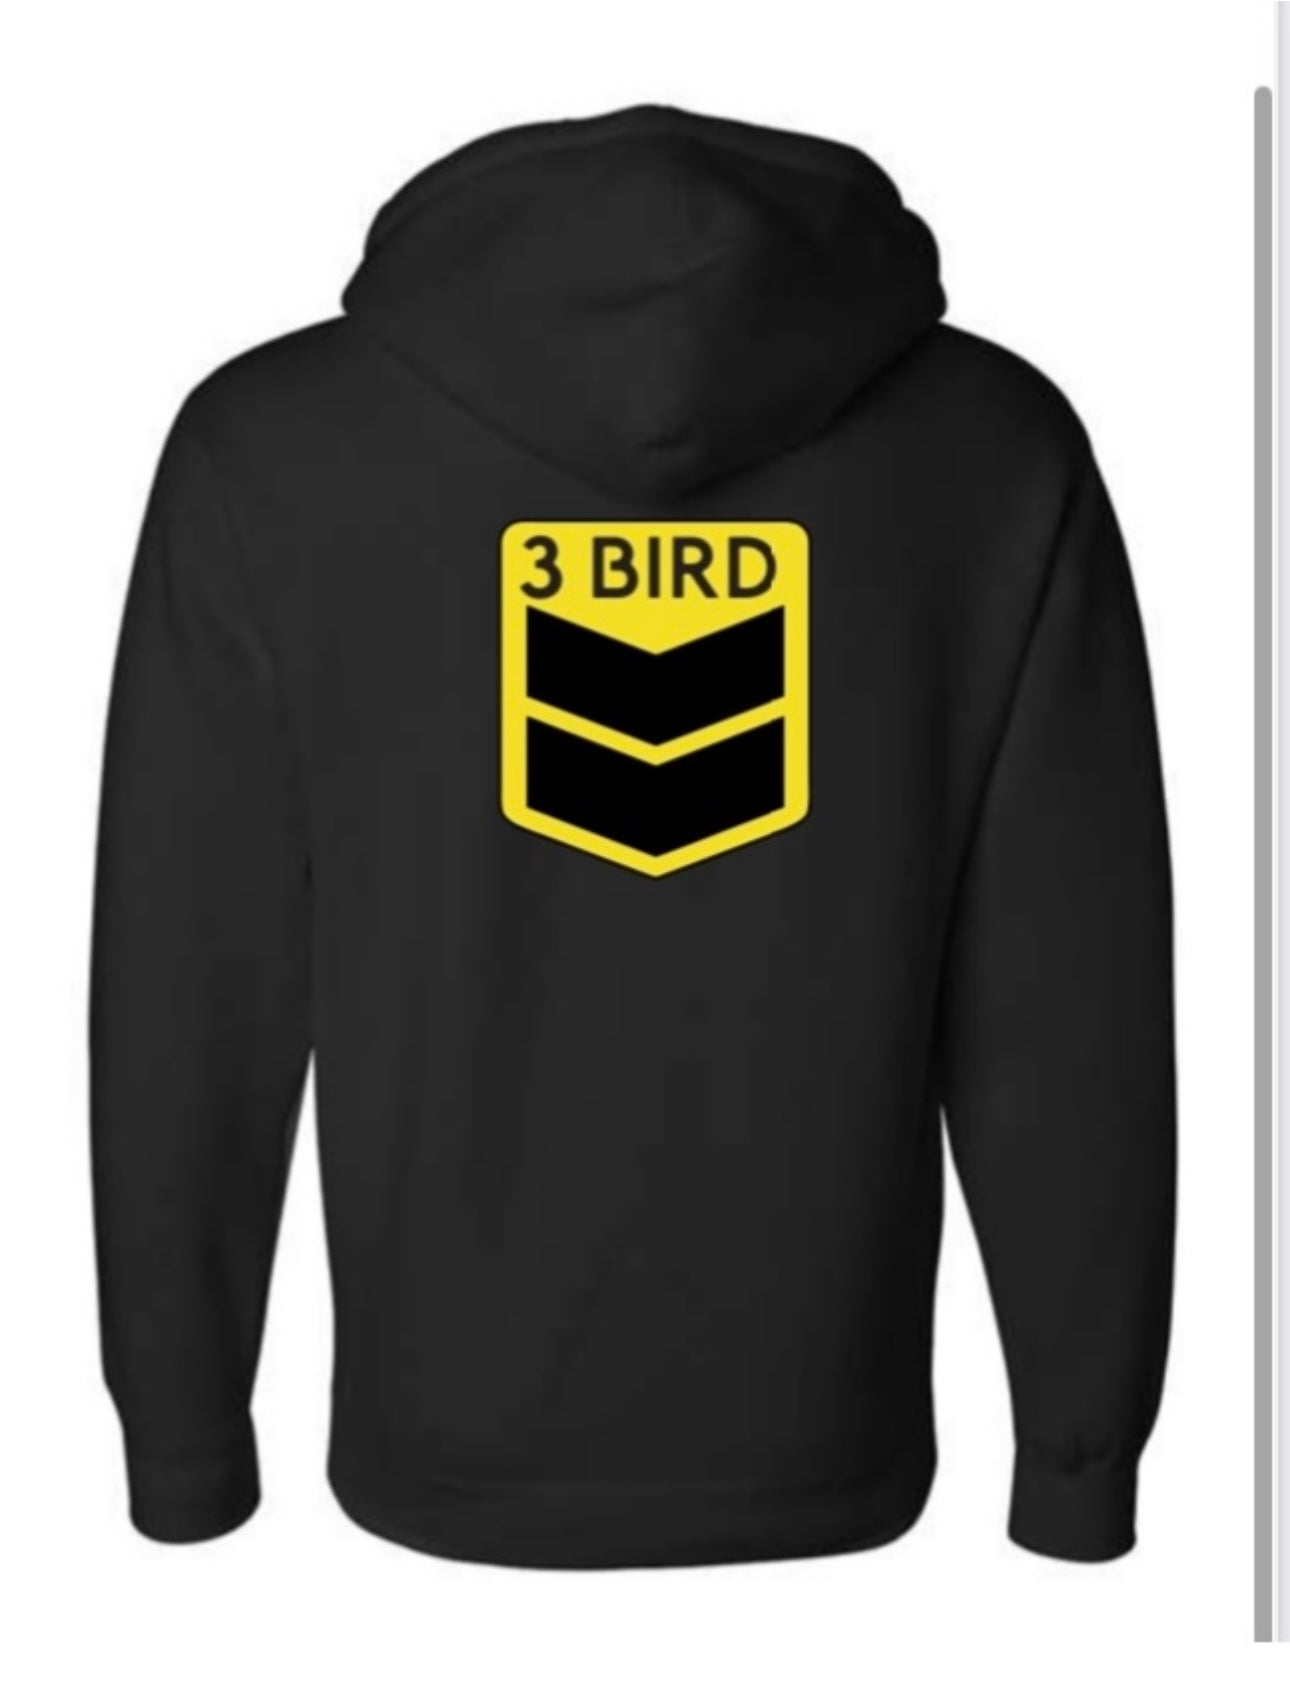 3 Bird Lifestyle • Be Good To People For No Reason • Black and Yellow